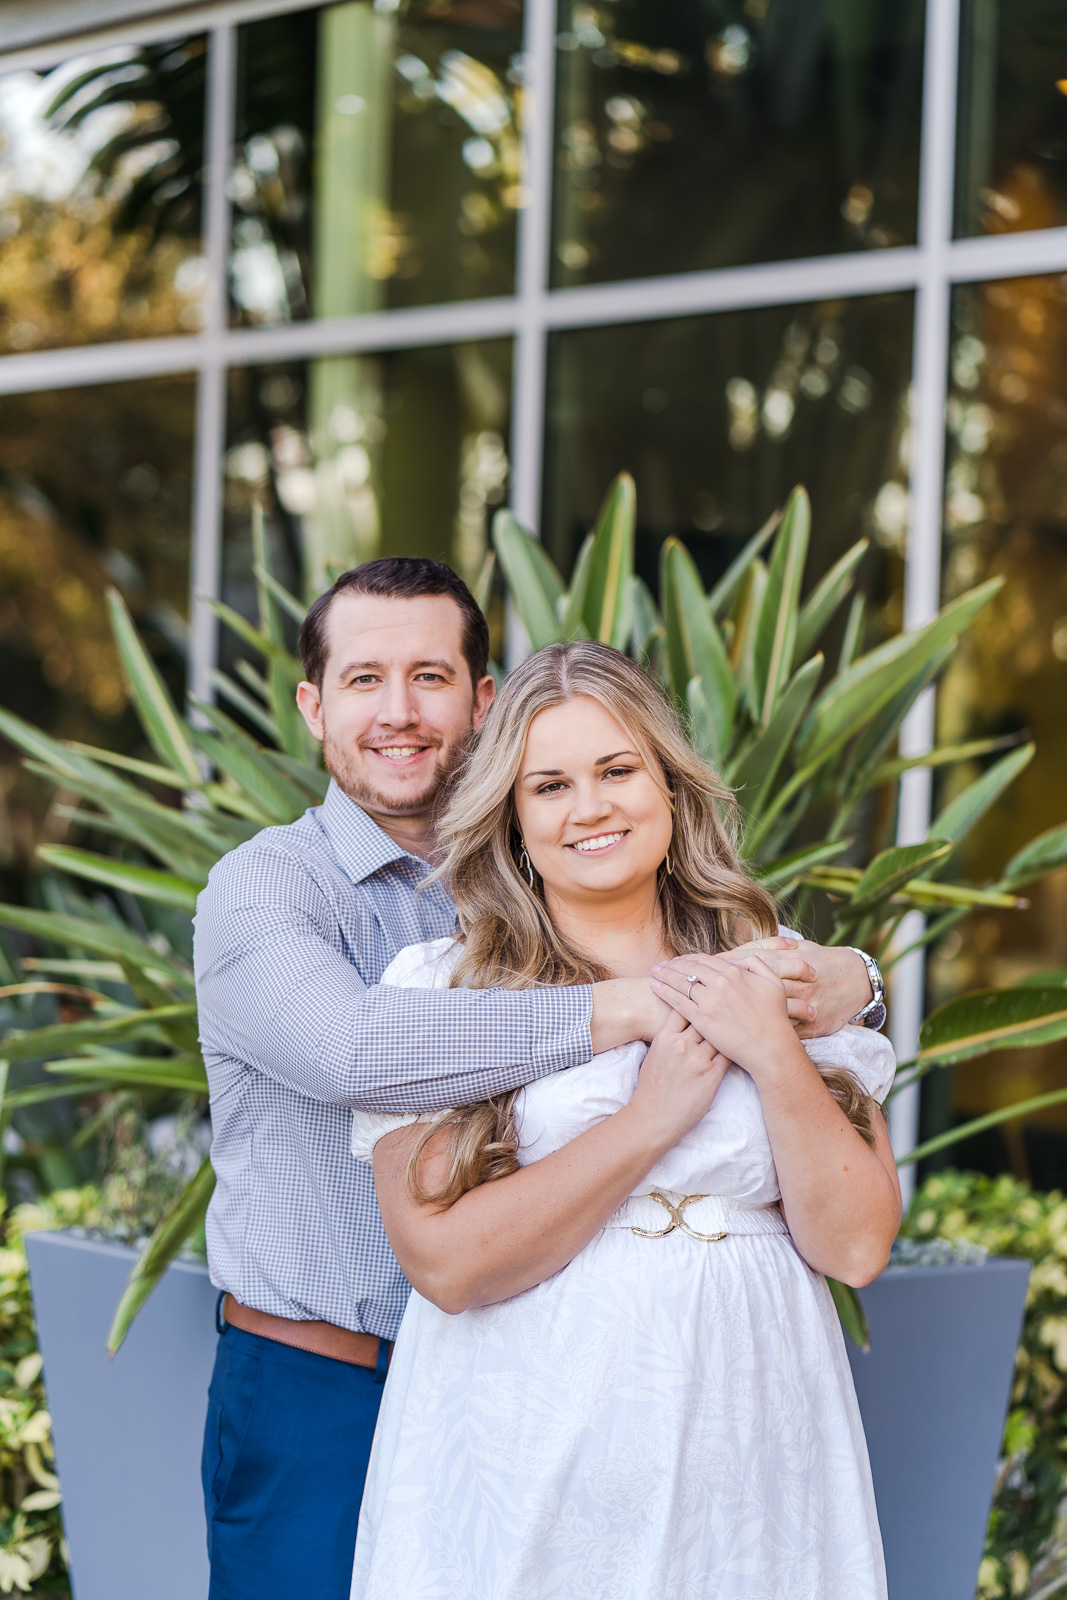 Orlando engagement location that is fun, colorful and playful by best photographer